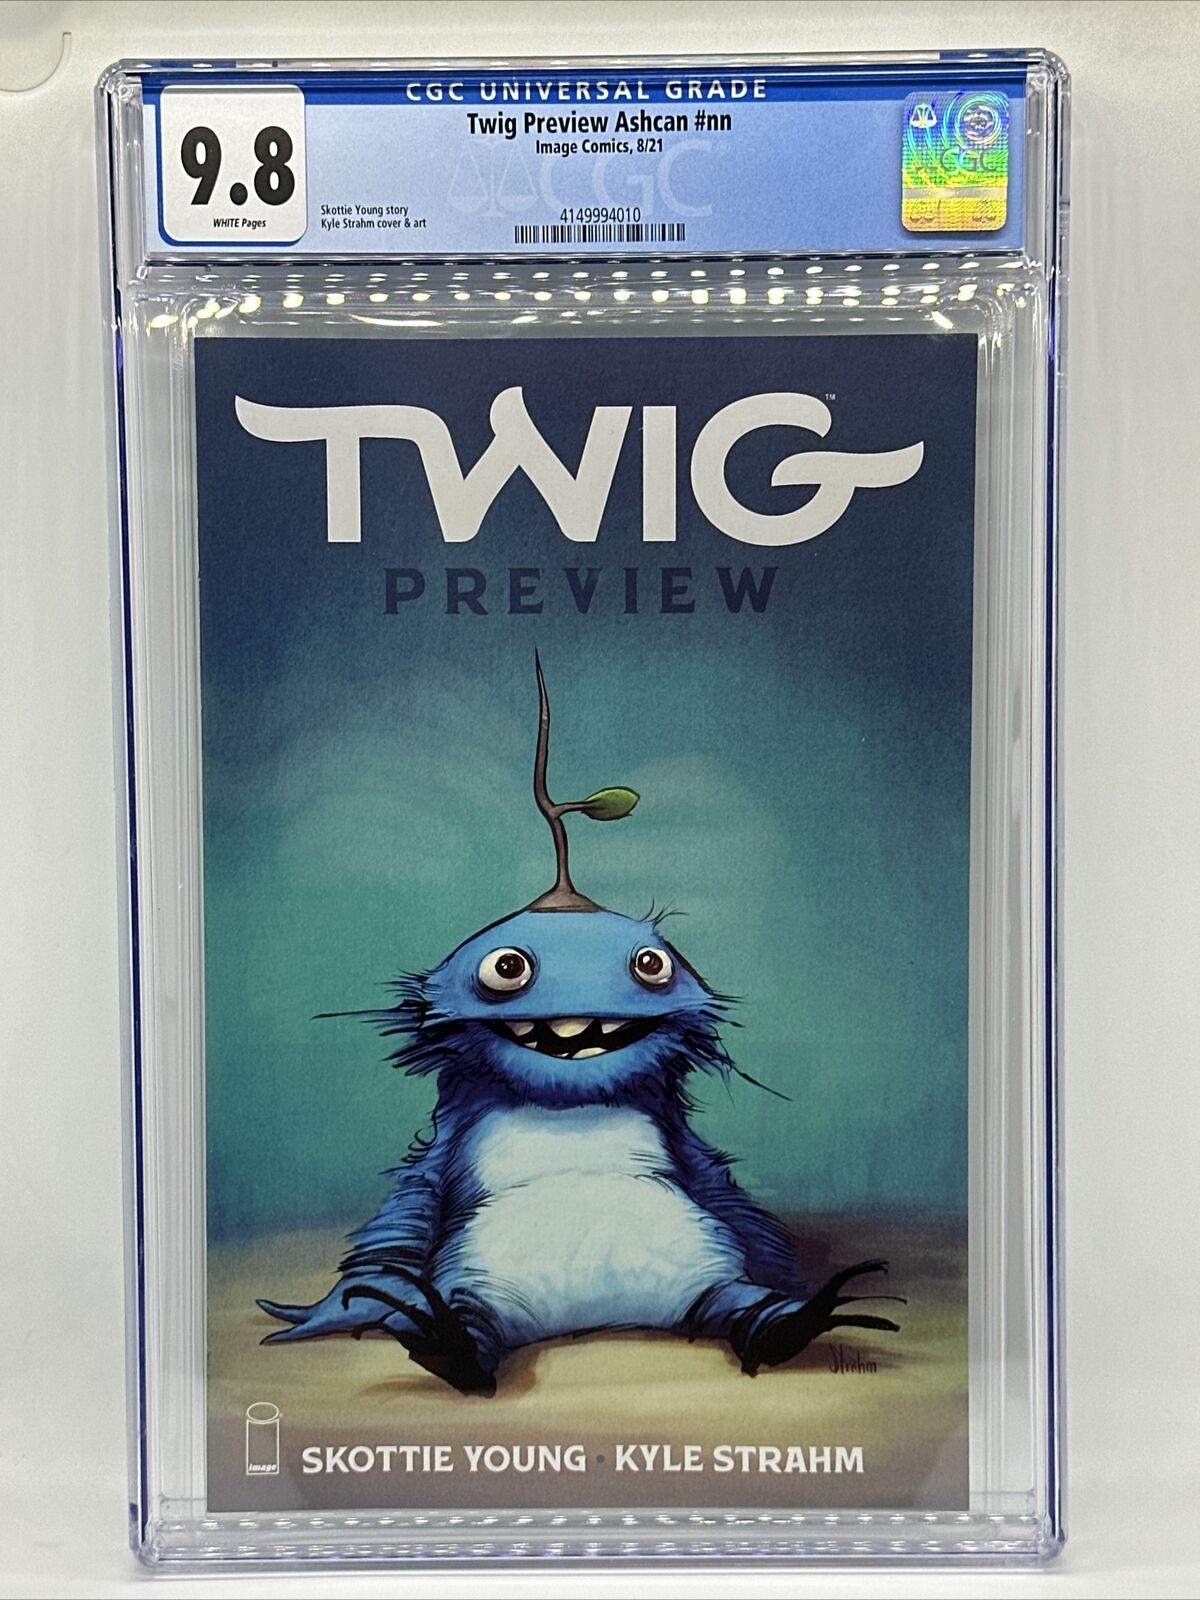 Twig Preview Ashcan #nn (2021) Image Comics. CGC 9.8  1 Per Store  1st Twig